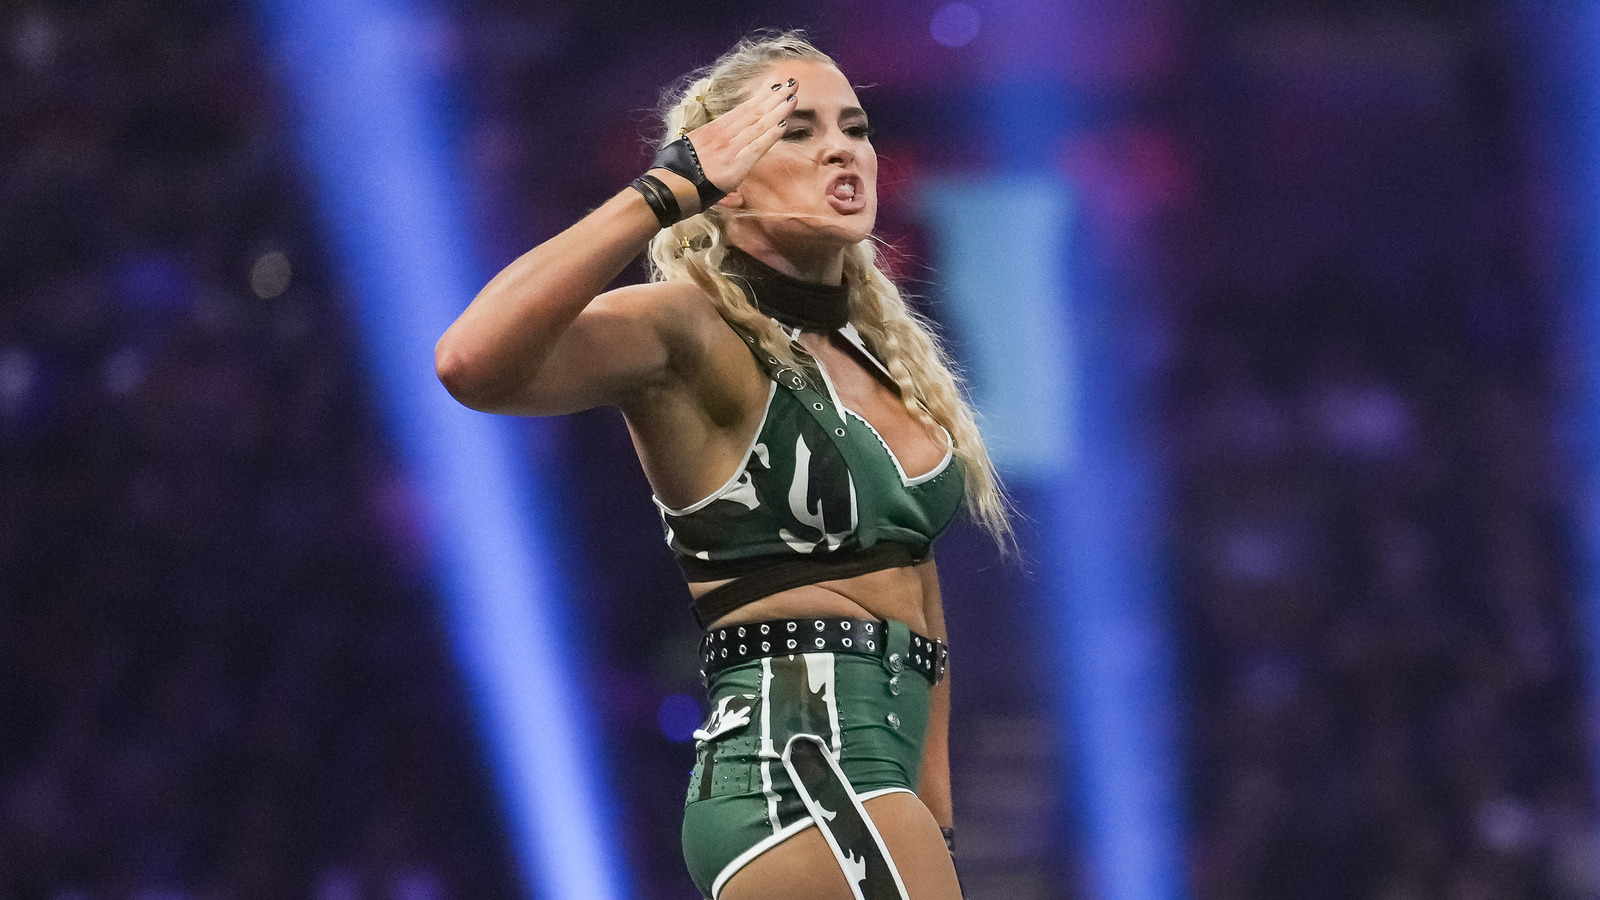 Macey Estrella, WWE's Lacey Evans, Doesn't Hold Back On Sgt. Slaughter & Family